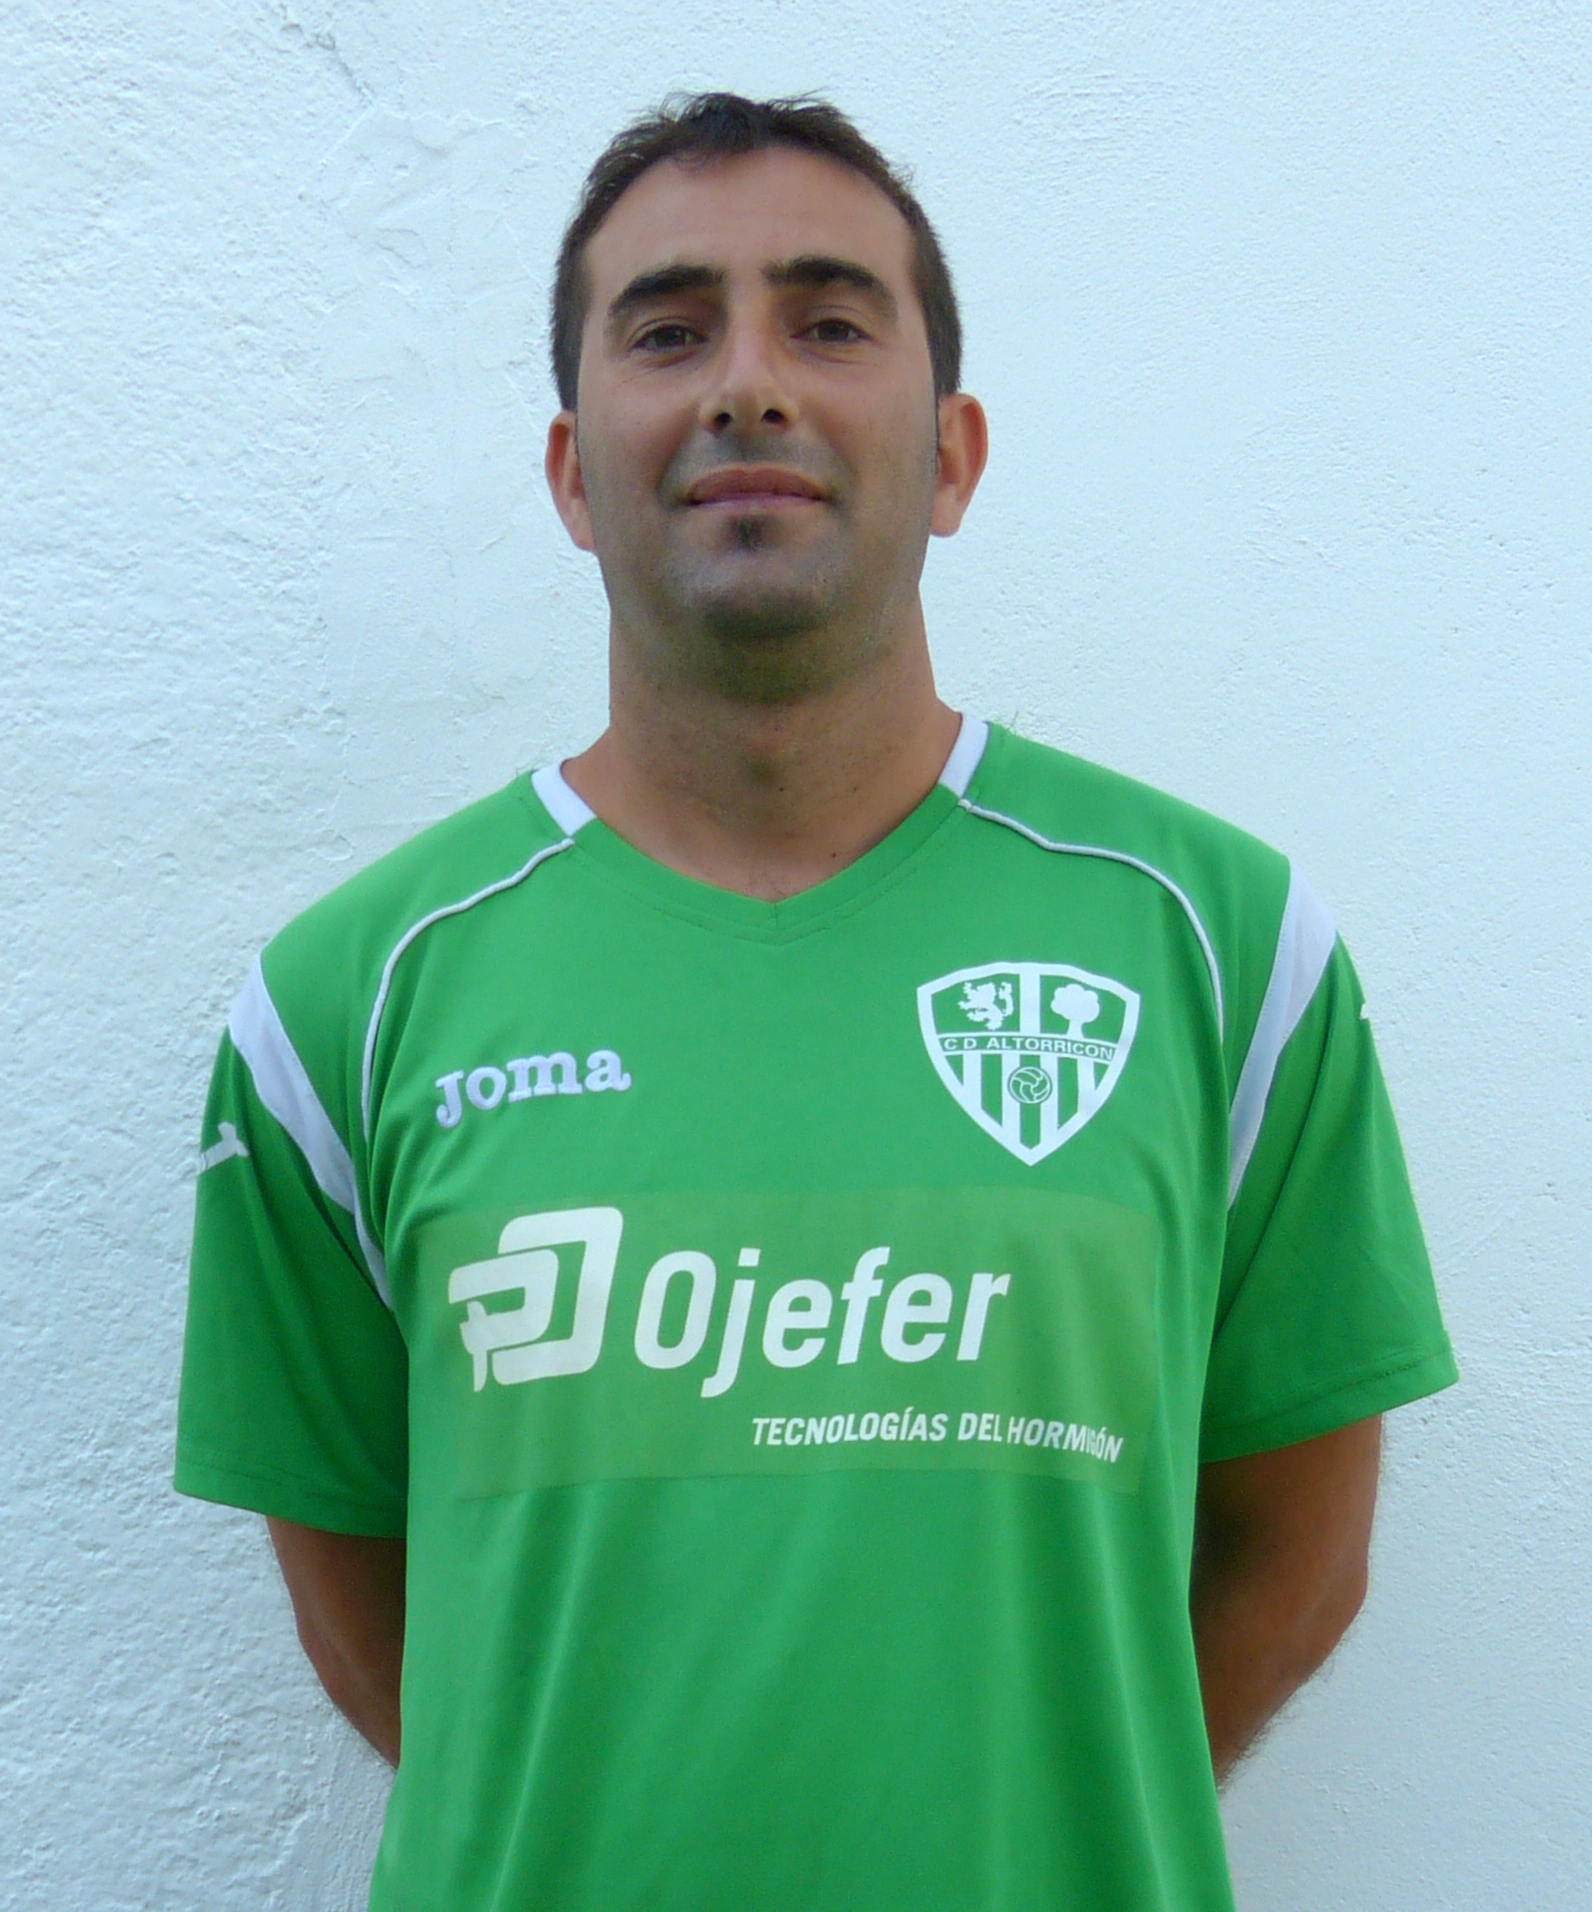 a man in a green jersey standing near a white wall